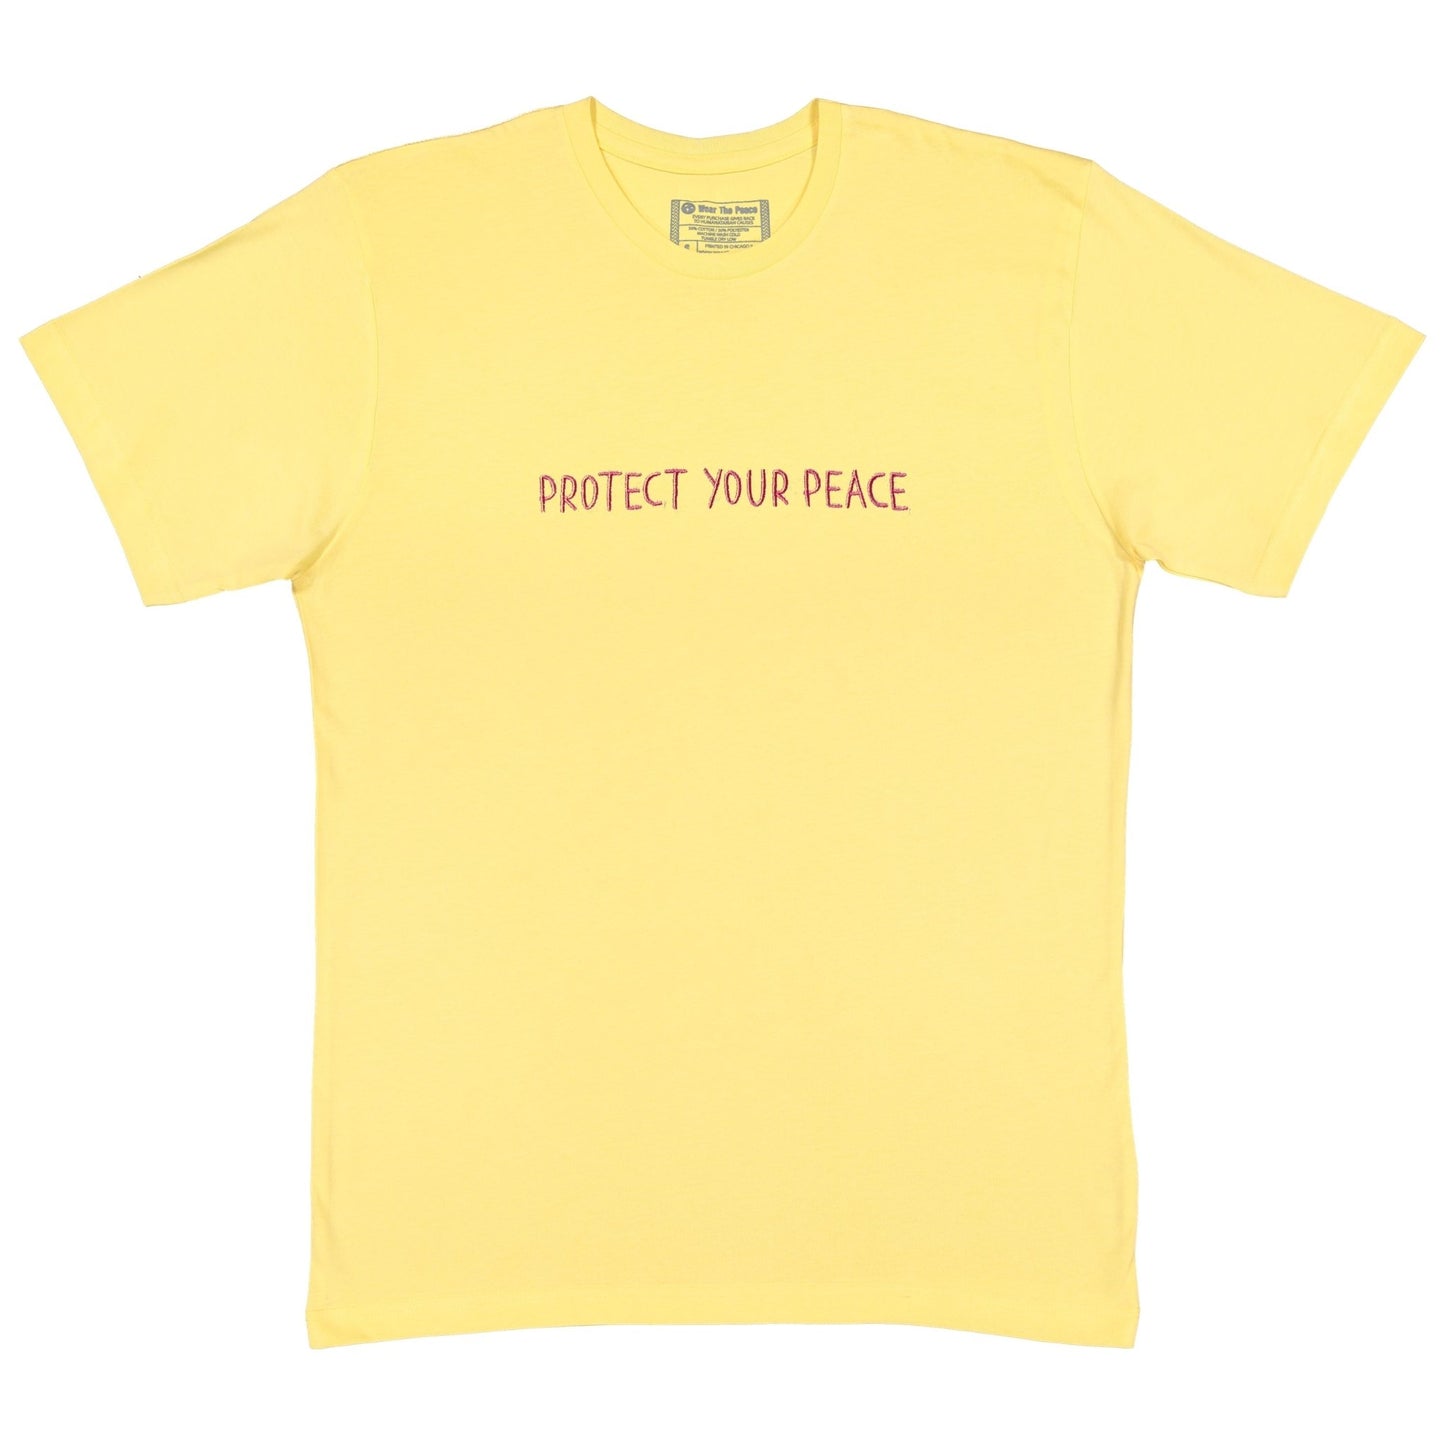 Protect Your Peace Embroidered Tee Wear The Peace Short Sleeves Yellow S